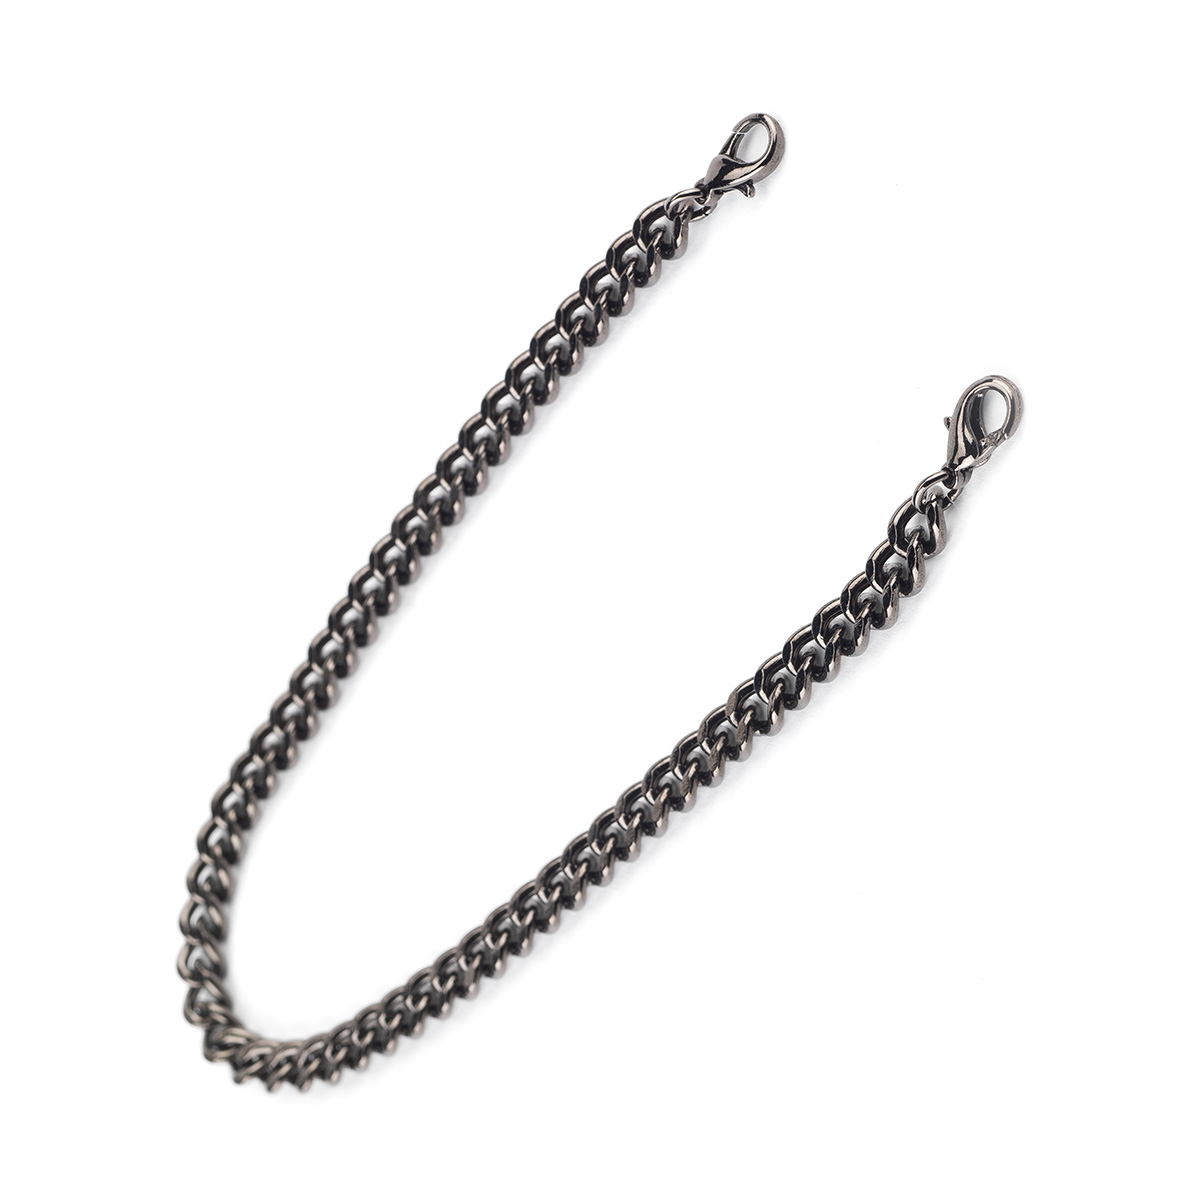 Metal chain handle for bags